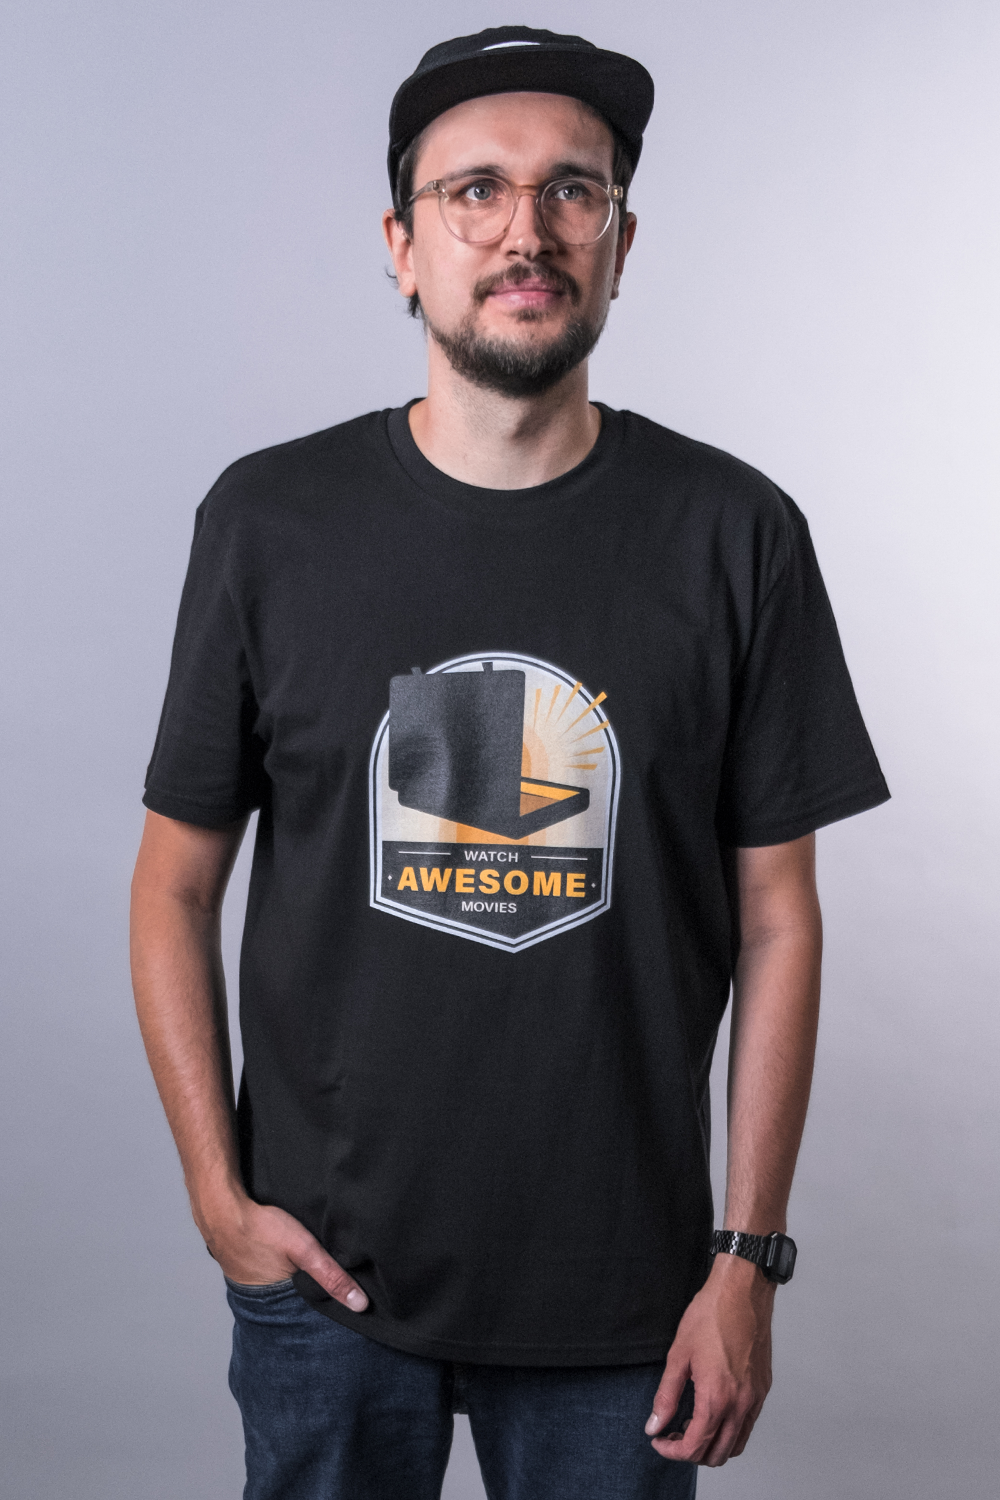 WATCH AWESOME MOVIES T-Shirt